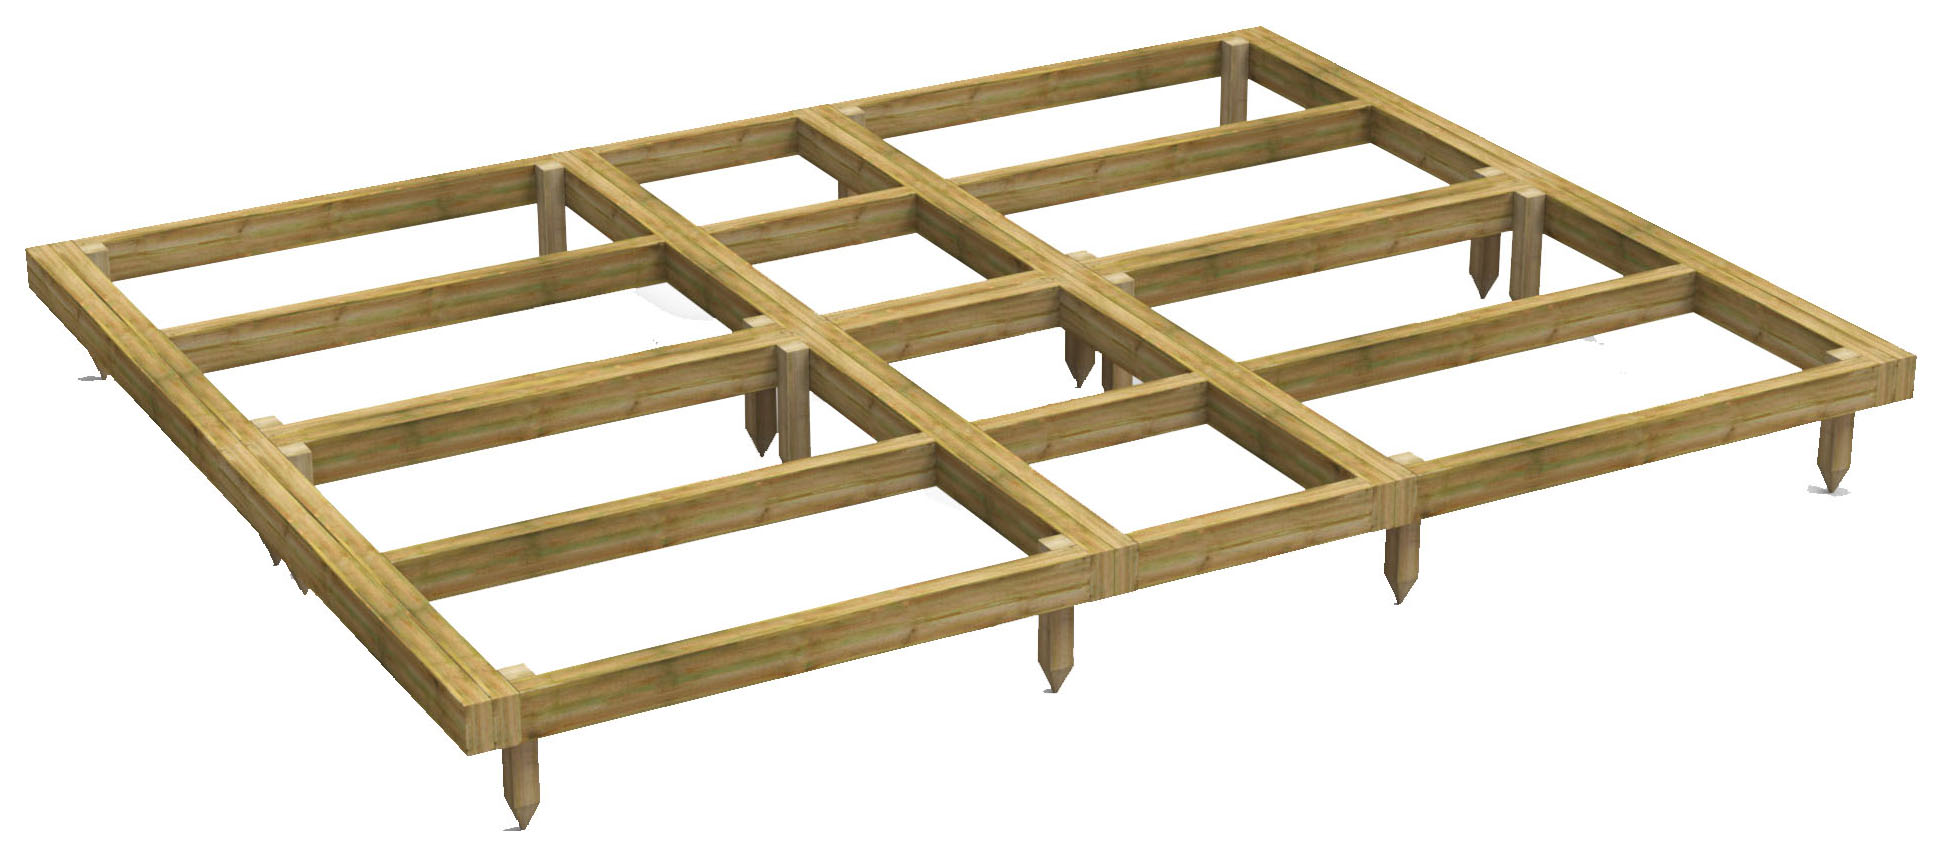 Image of Power Sheds 10 x 8ft Pressure Treated Garden Building Base Kit